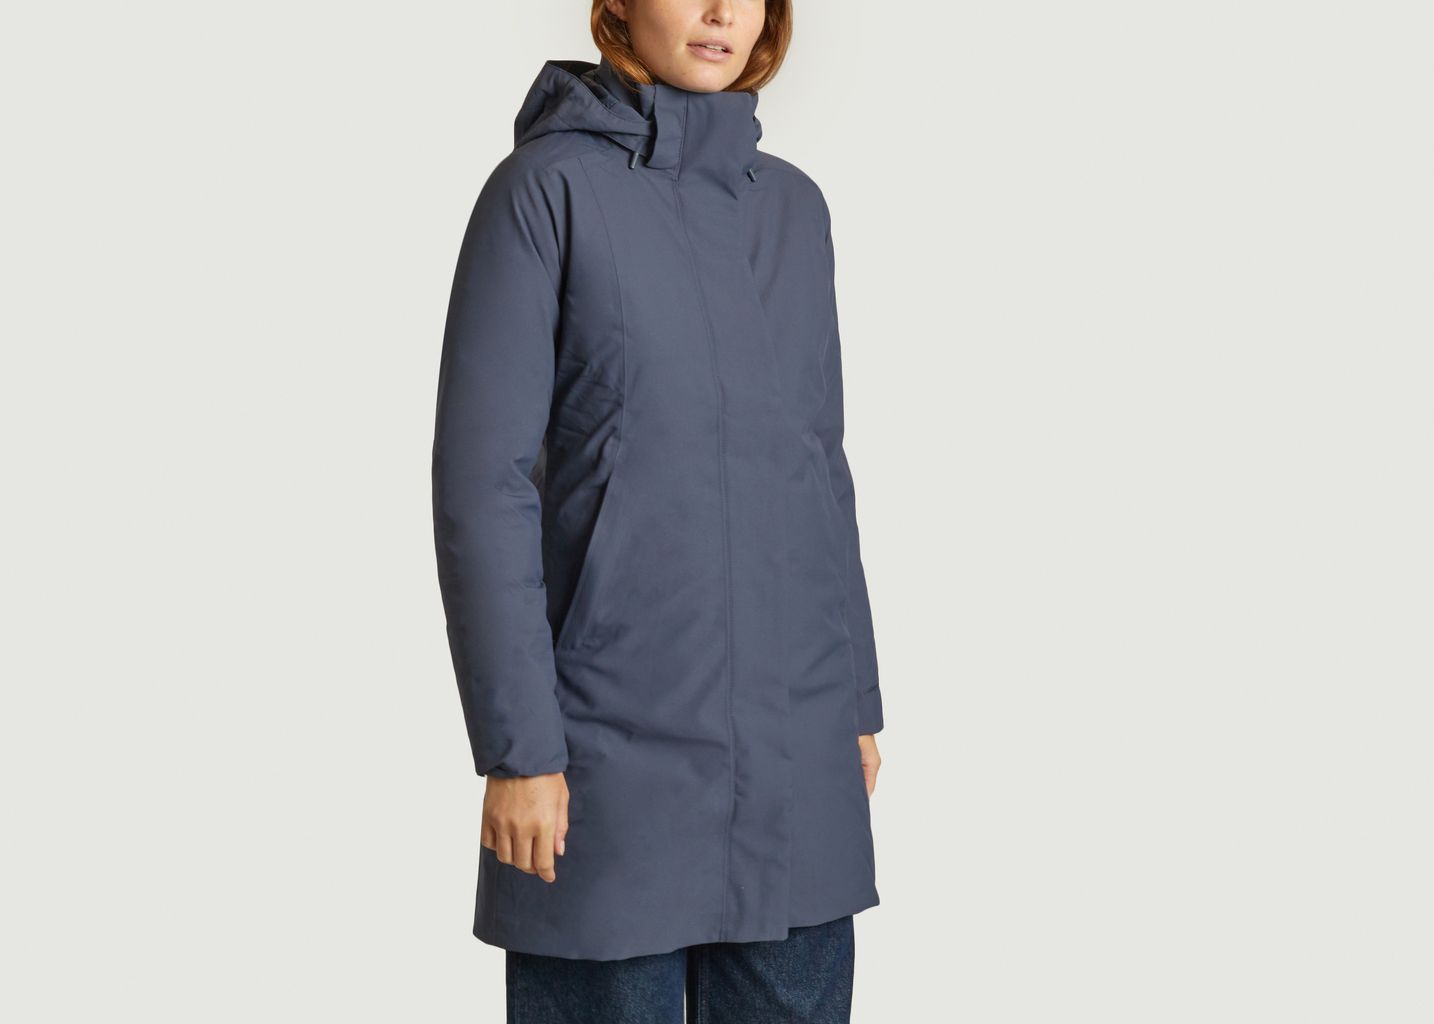 W's Tres 3-in-1 Parka - Patagonia